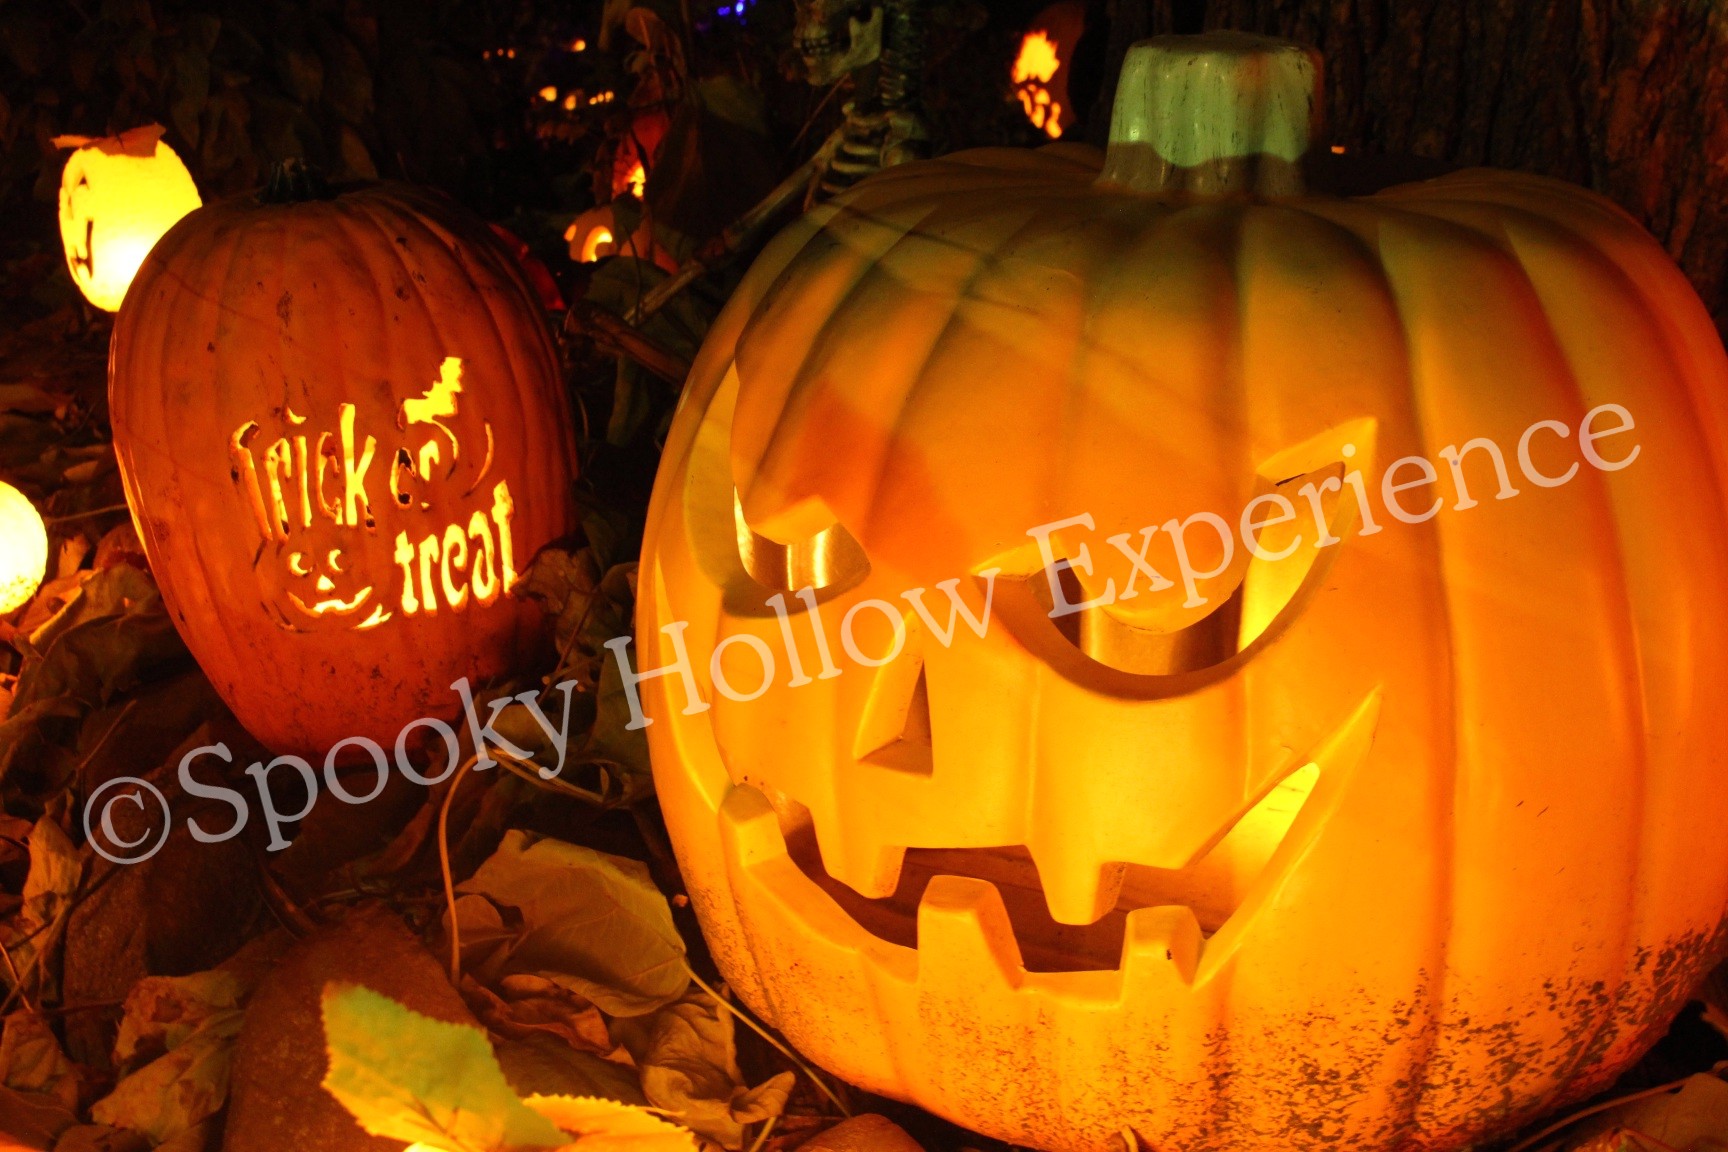 Spooky Hollow Experience Copyright Jack's Pumpkin Patch